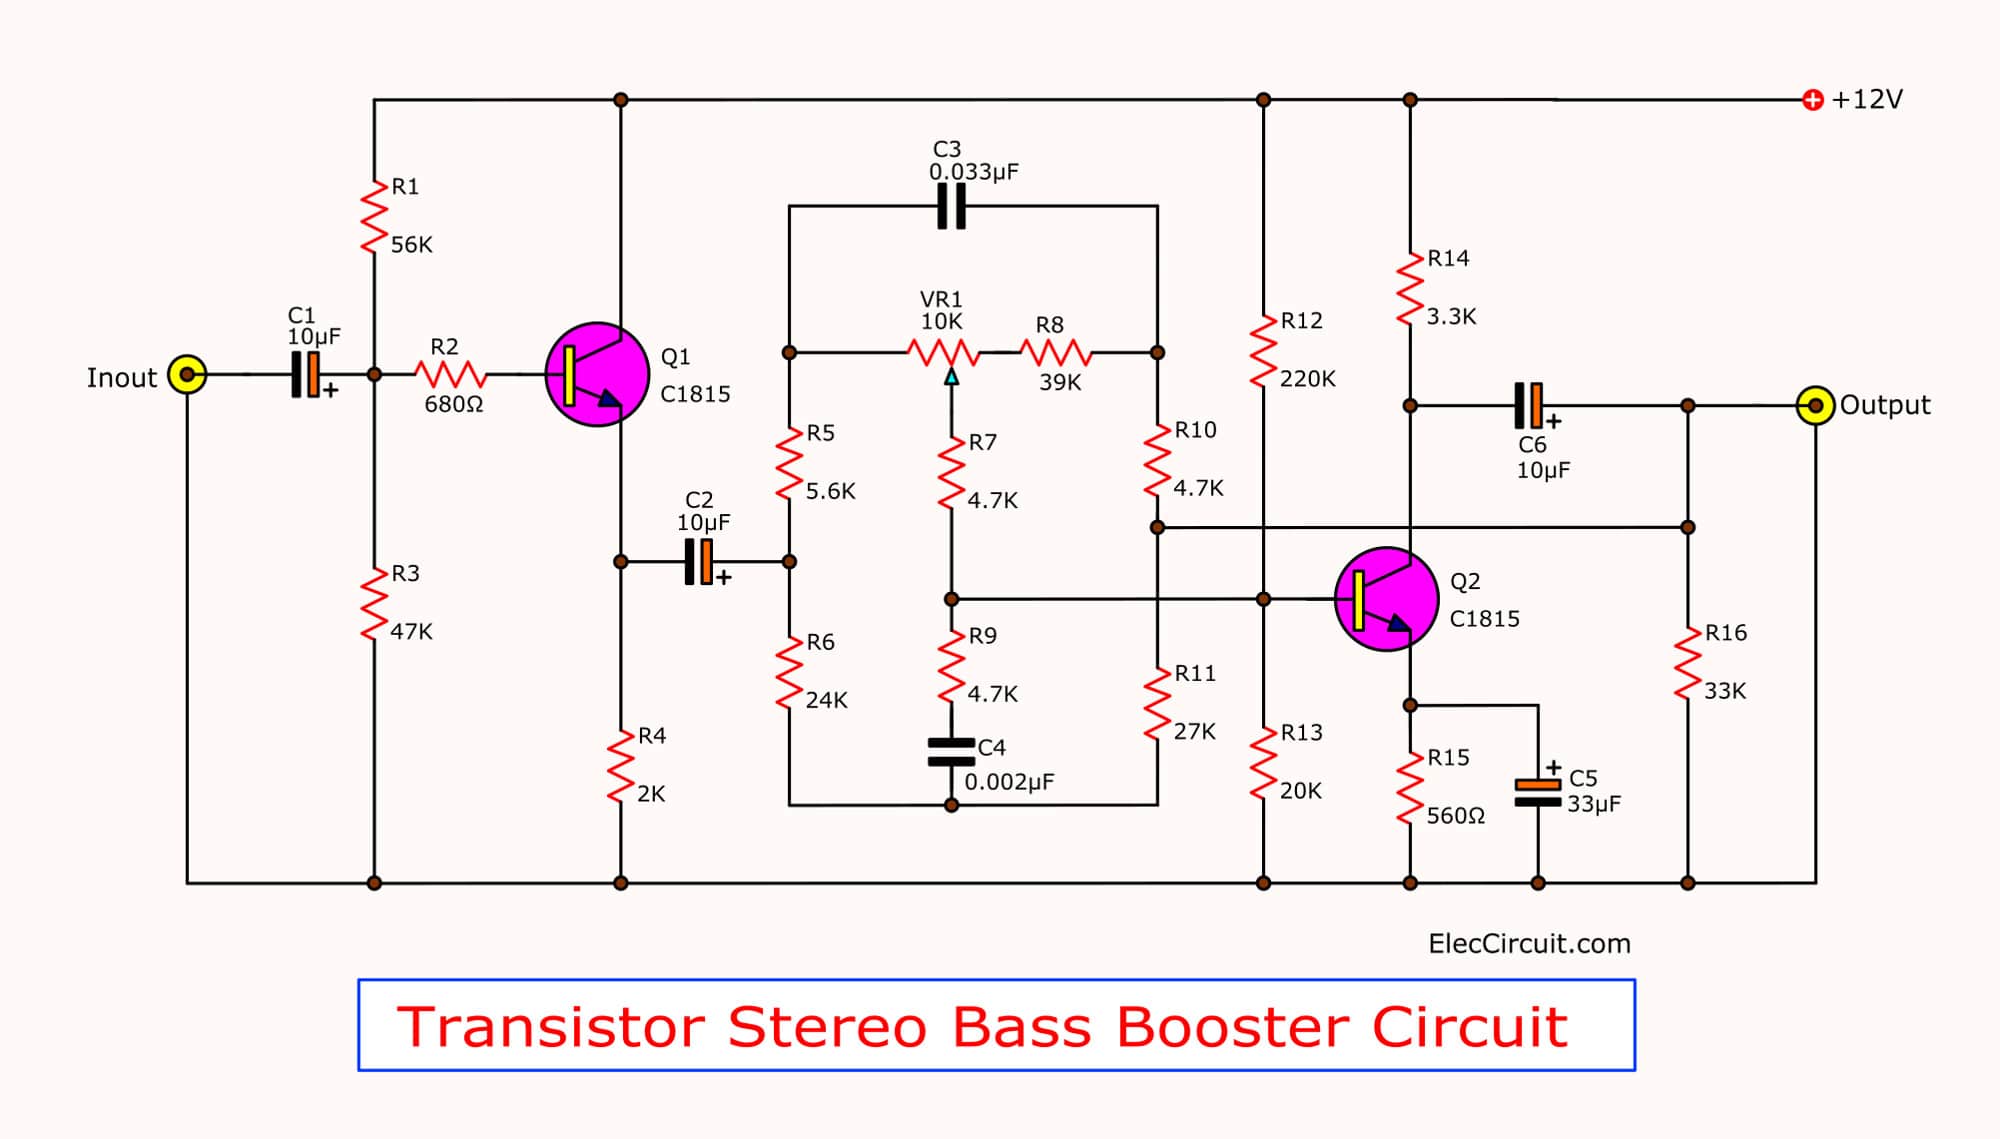 Transistor stereo bass booster circuit projects